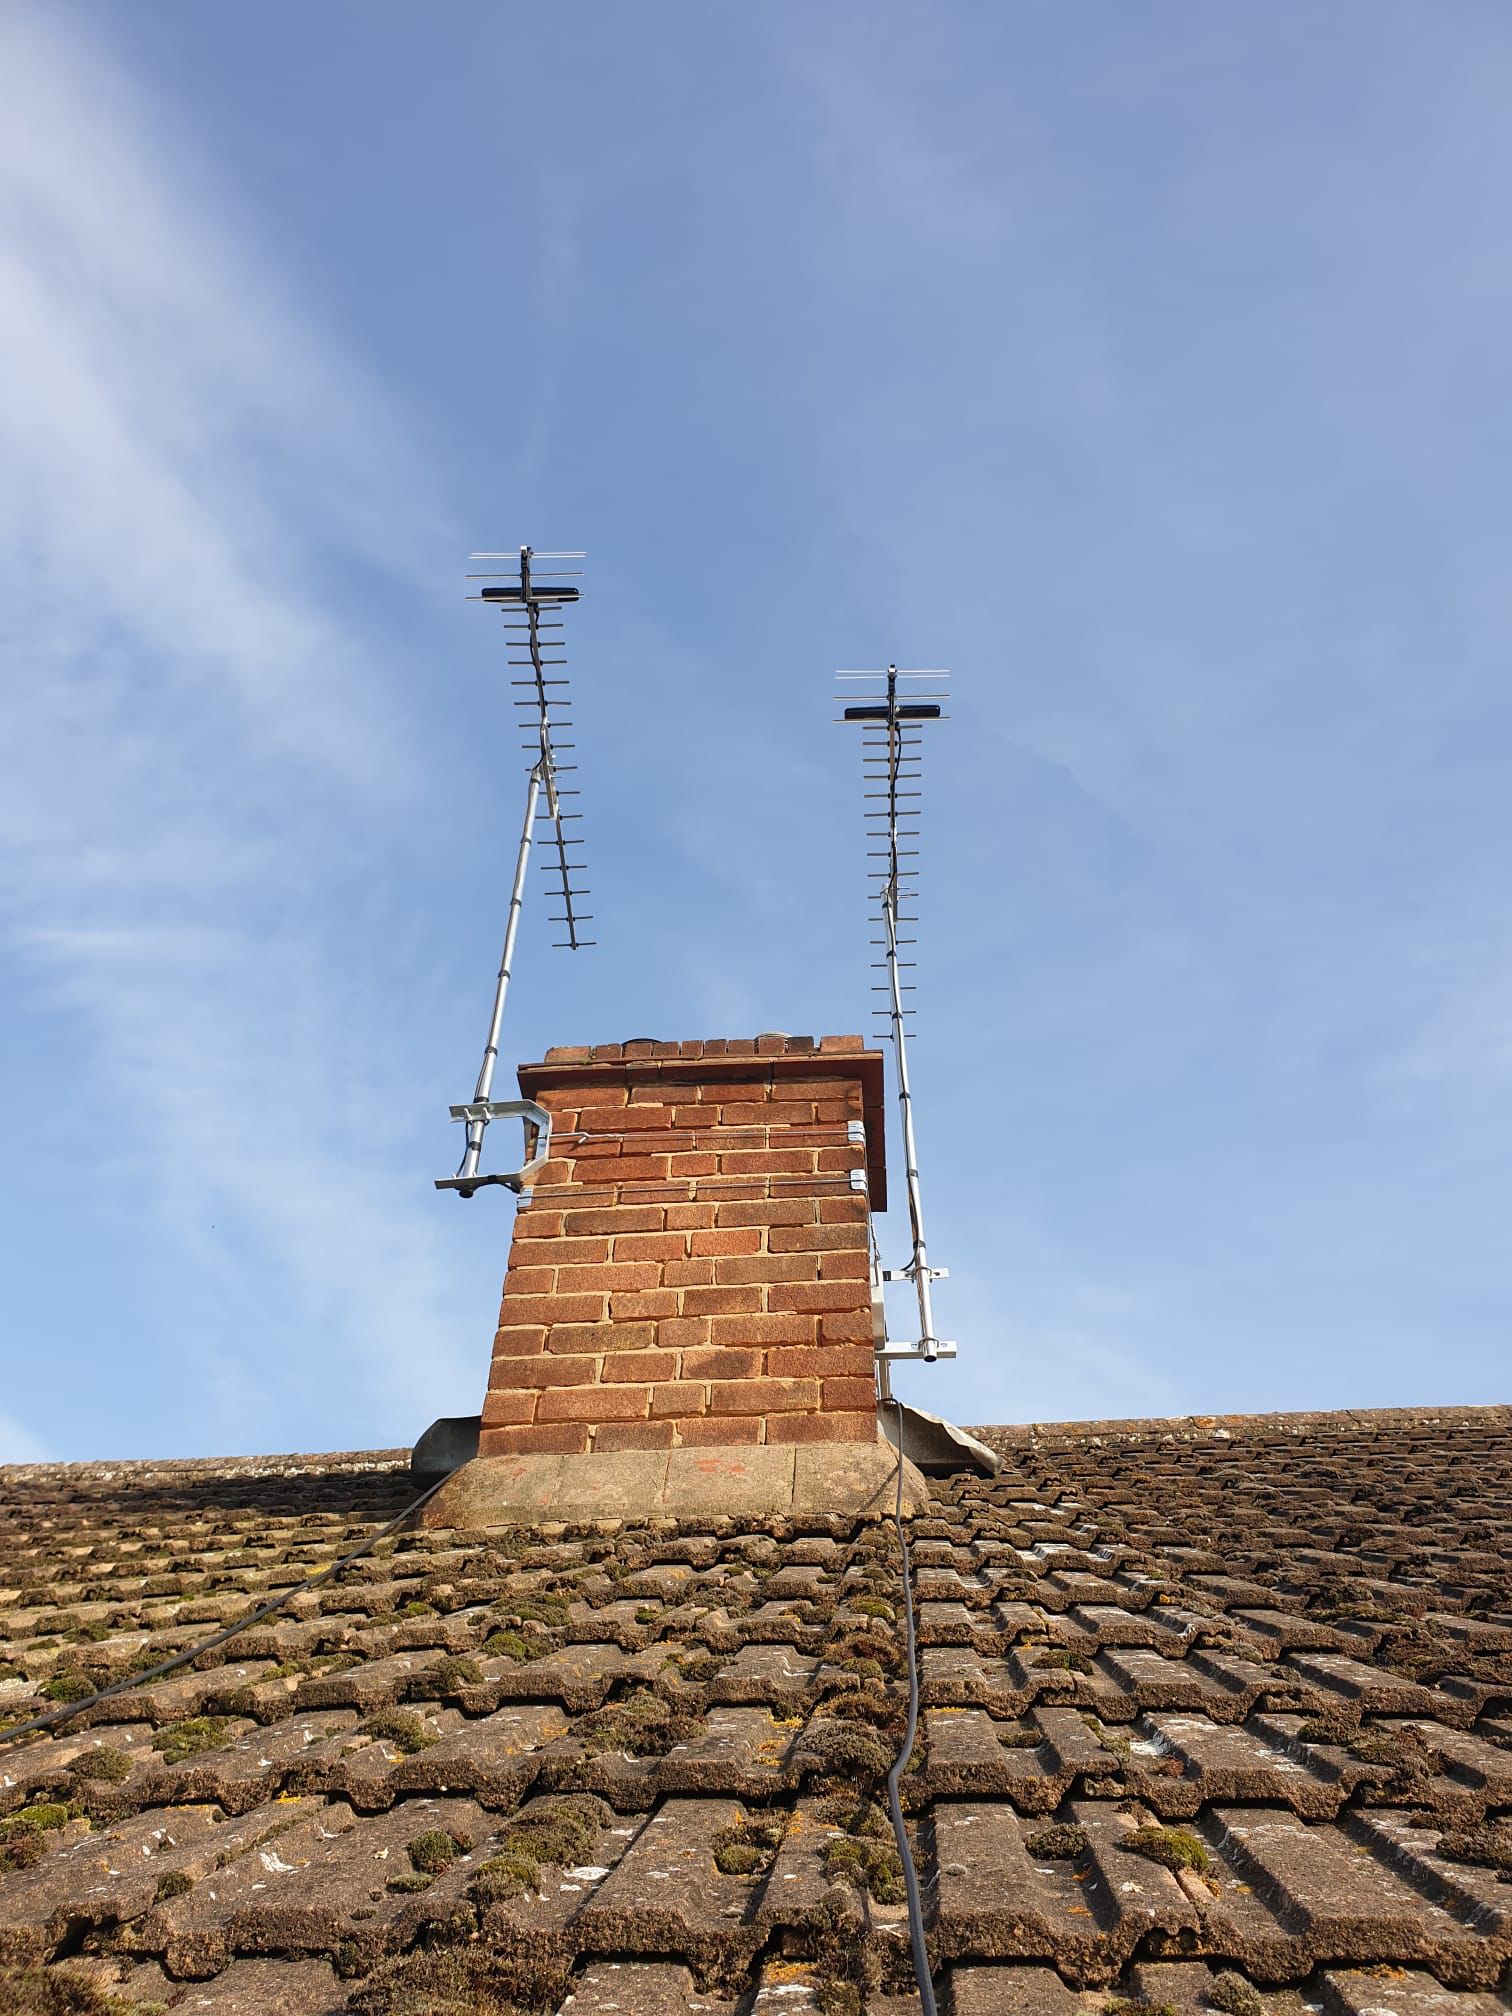 Neighbours both had their aerials done at the same time on the same chimney stack